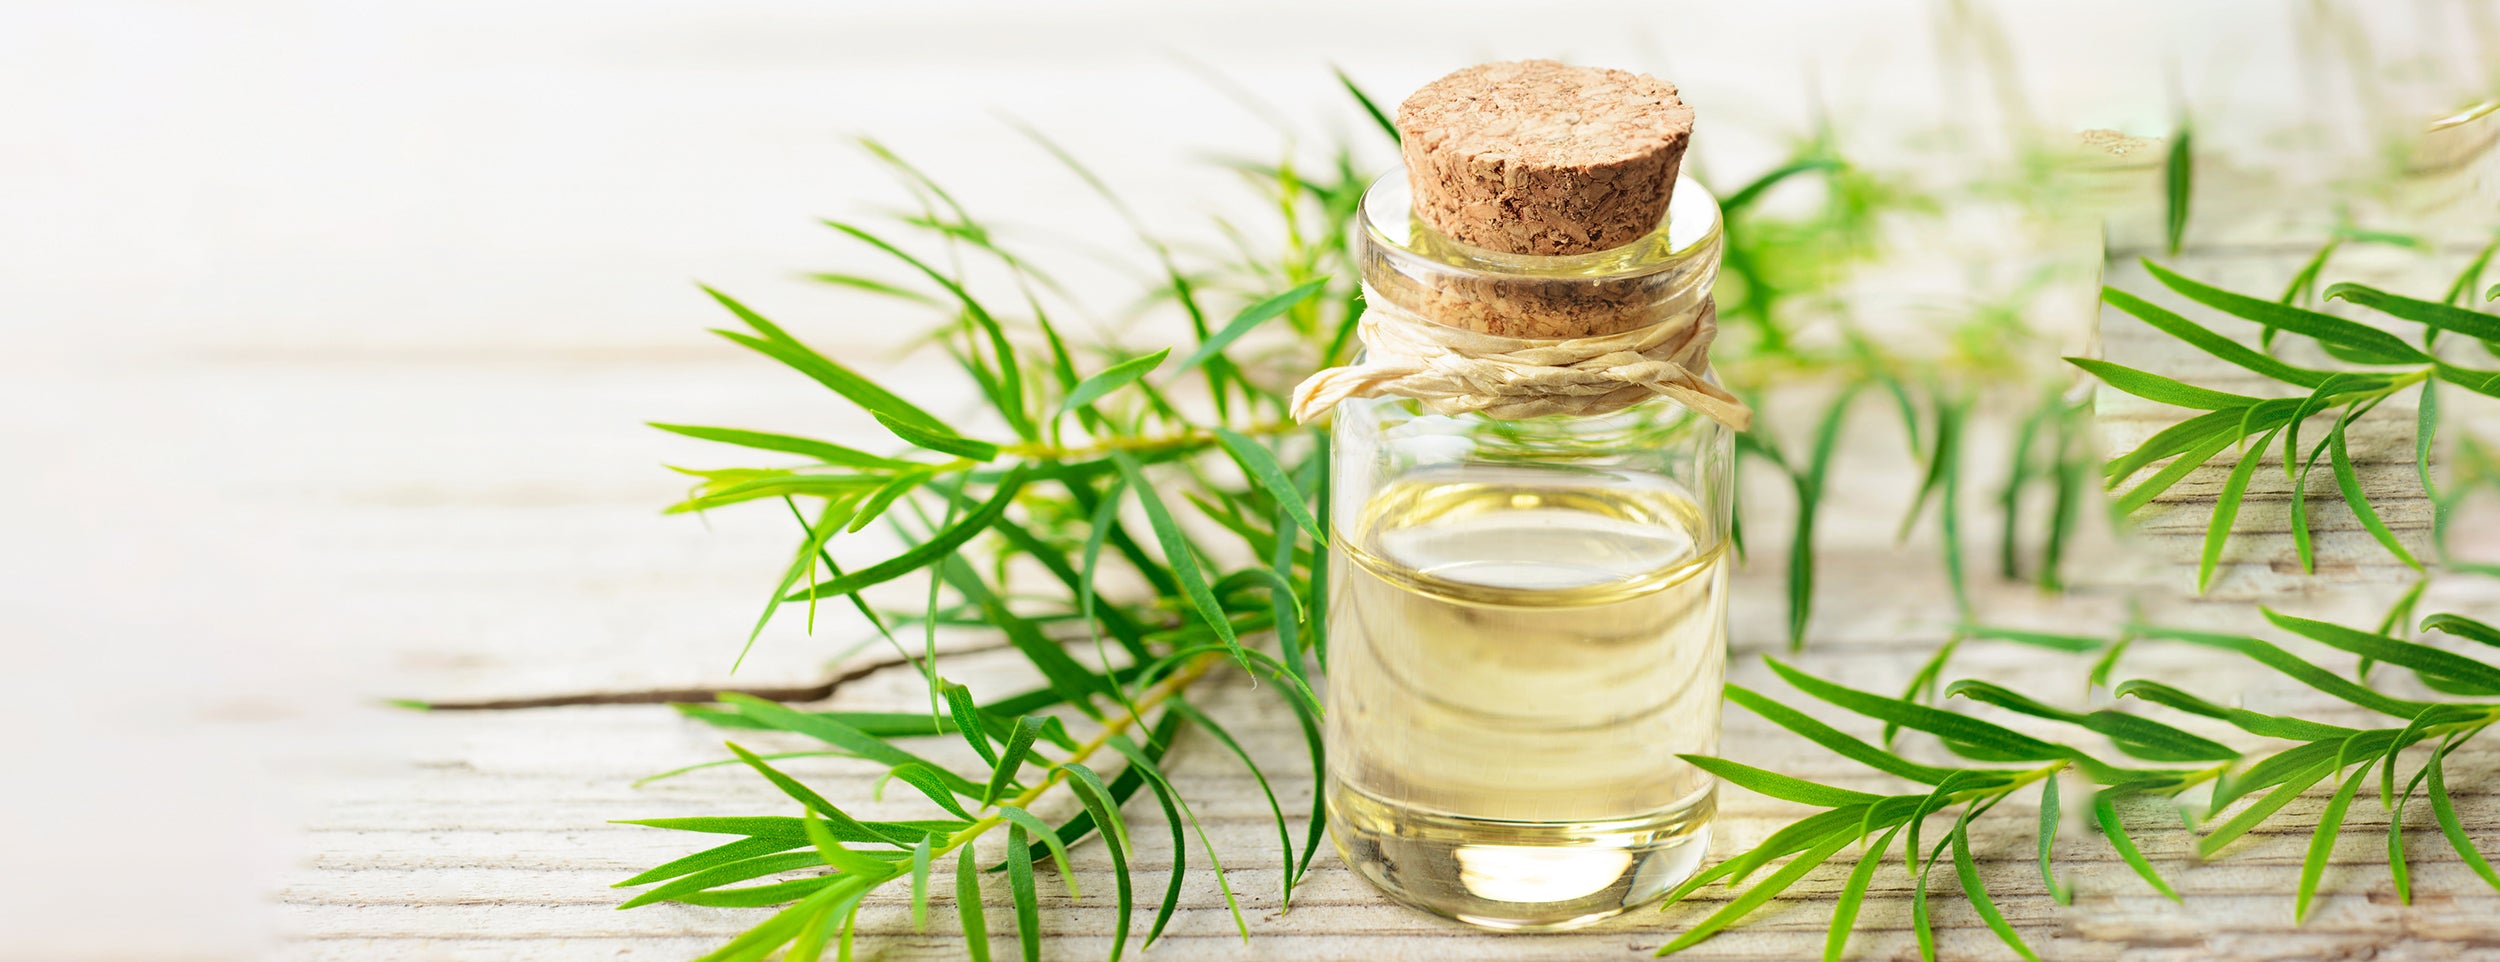 Insect bites can be treated naturally with tea tree oil and lavender oil